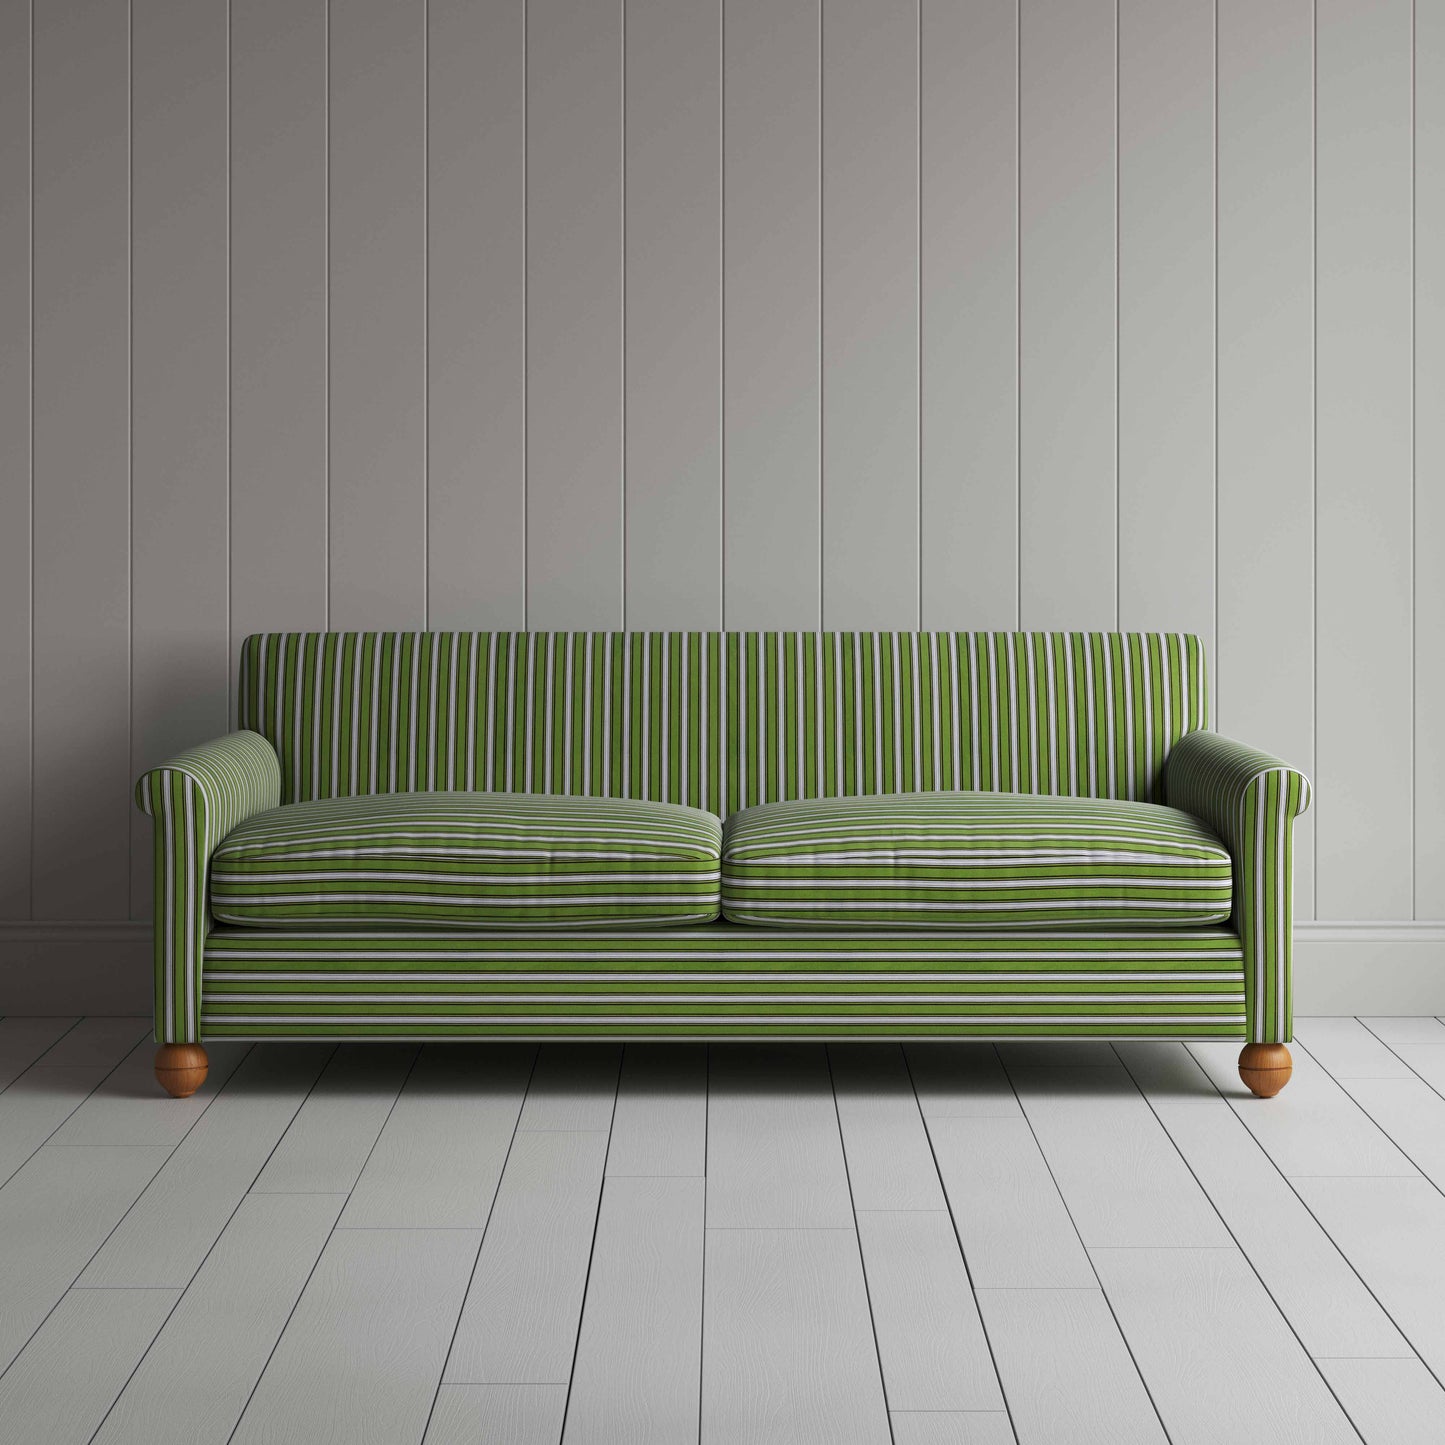 Idler 4 Seater Sofa in Colonnade Cotton, Green and Wine